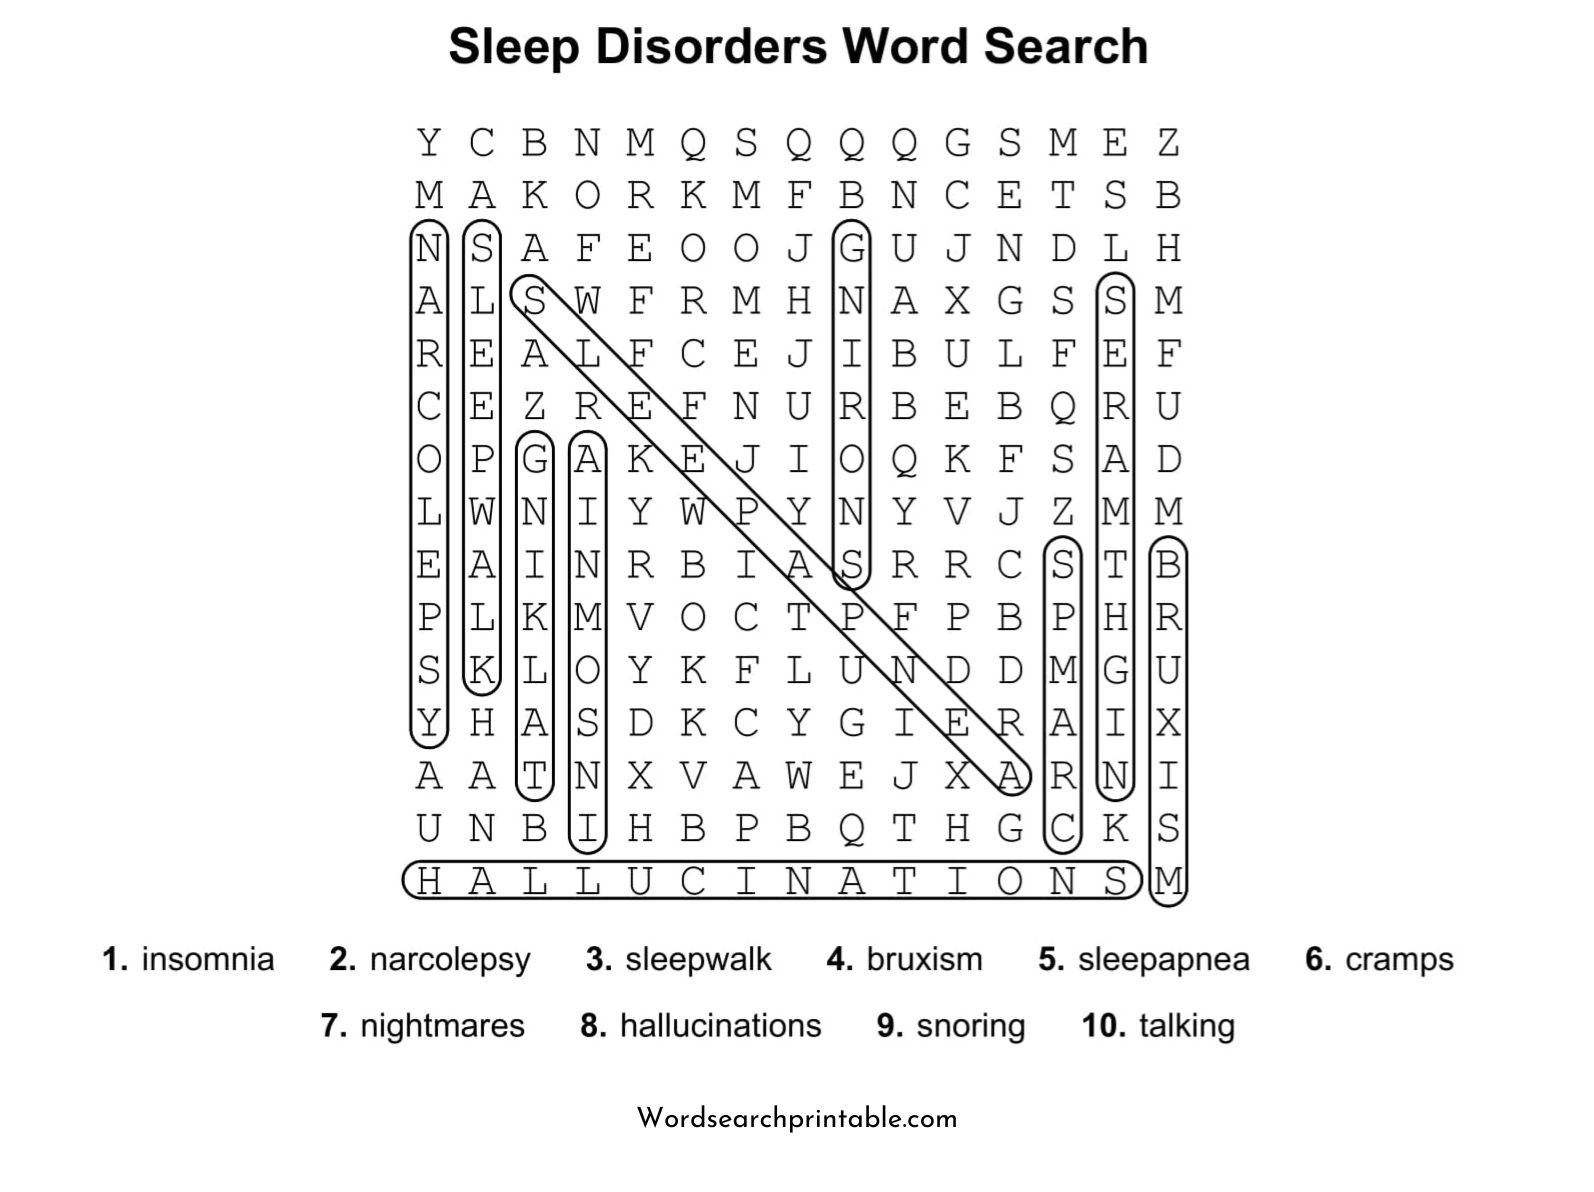 sleep disorders word search puzzle solution